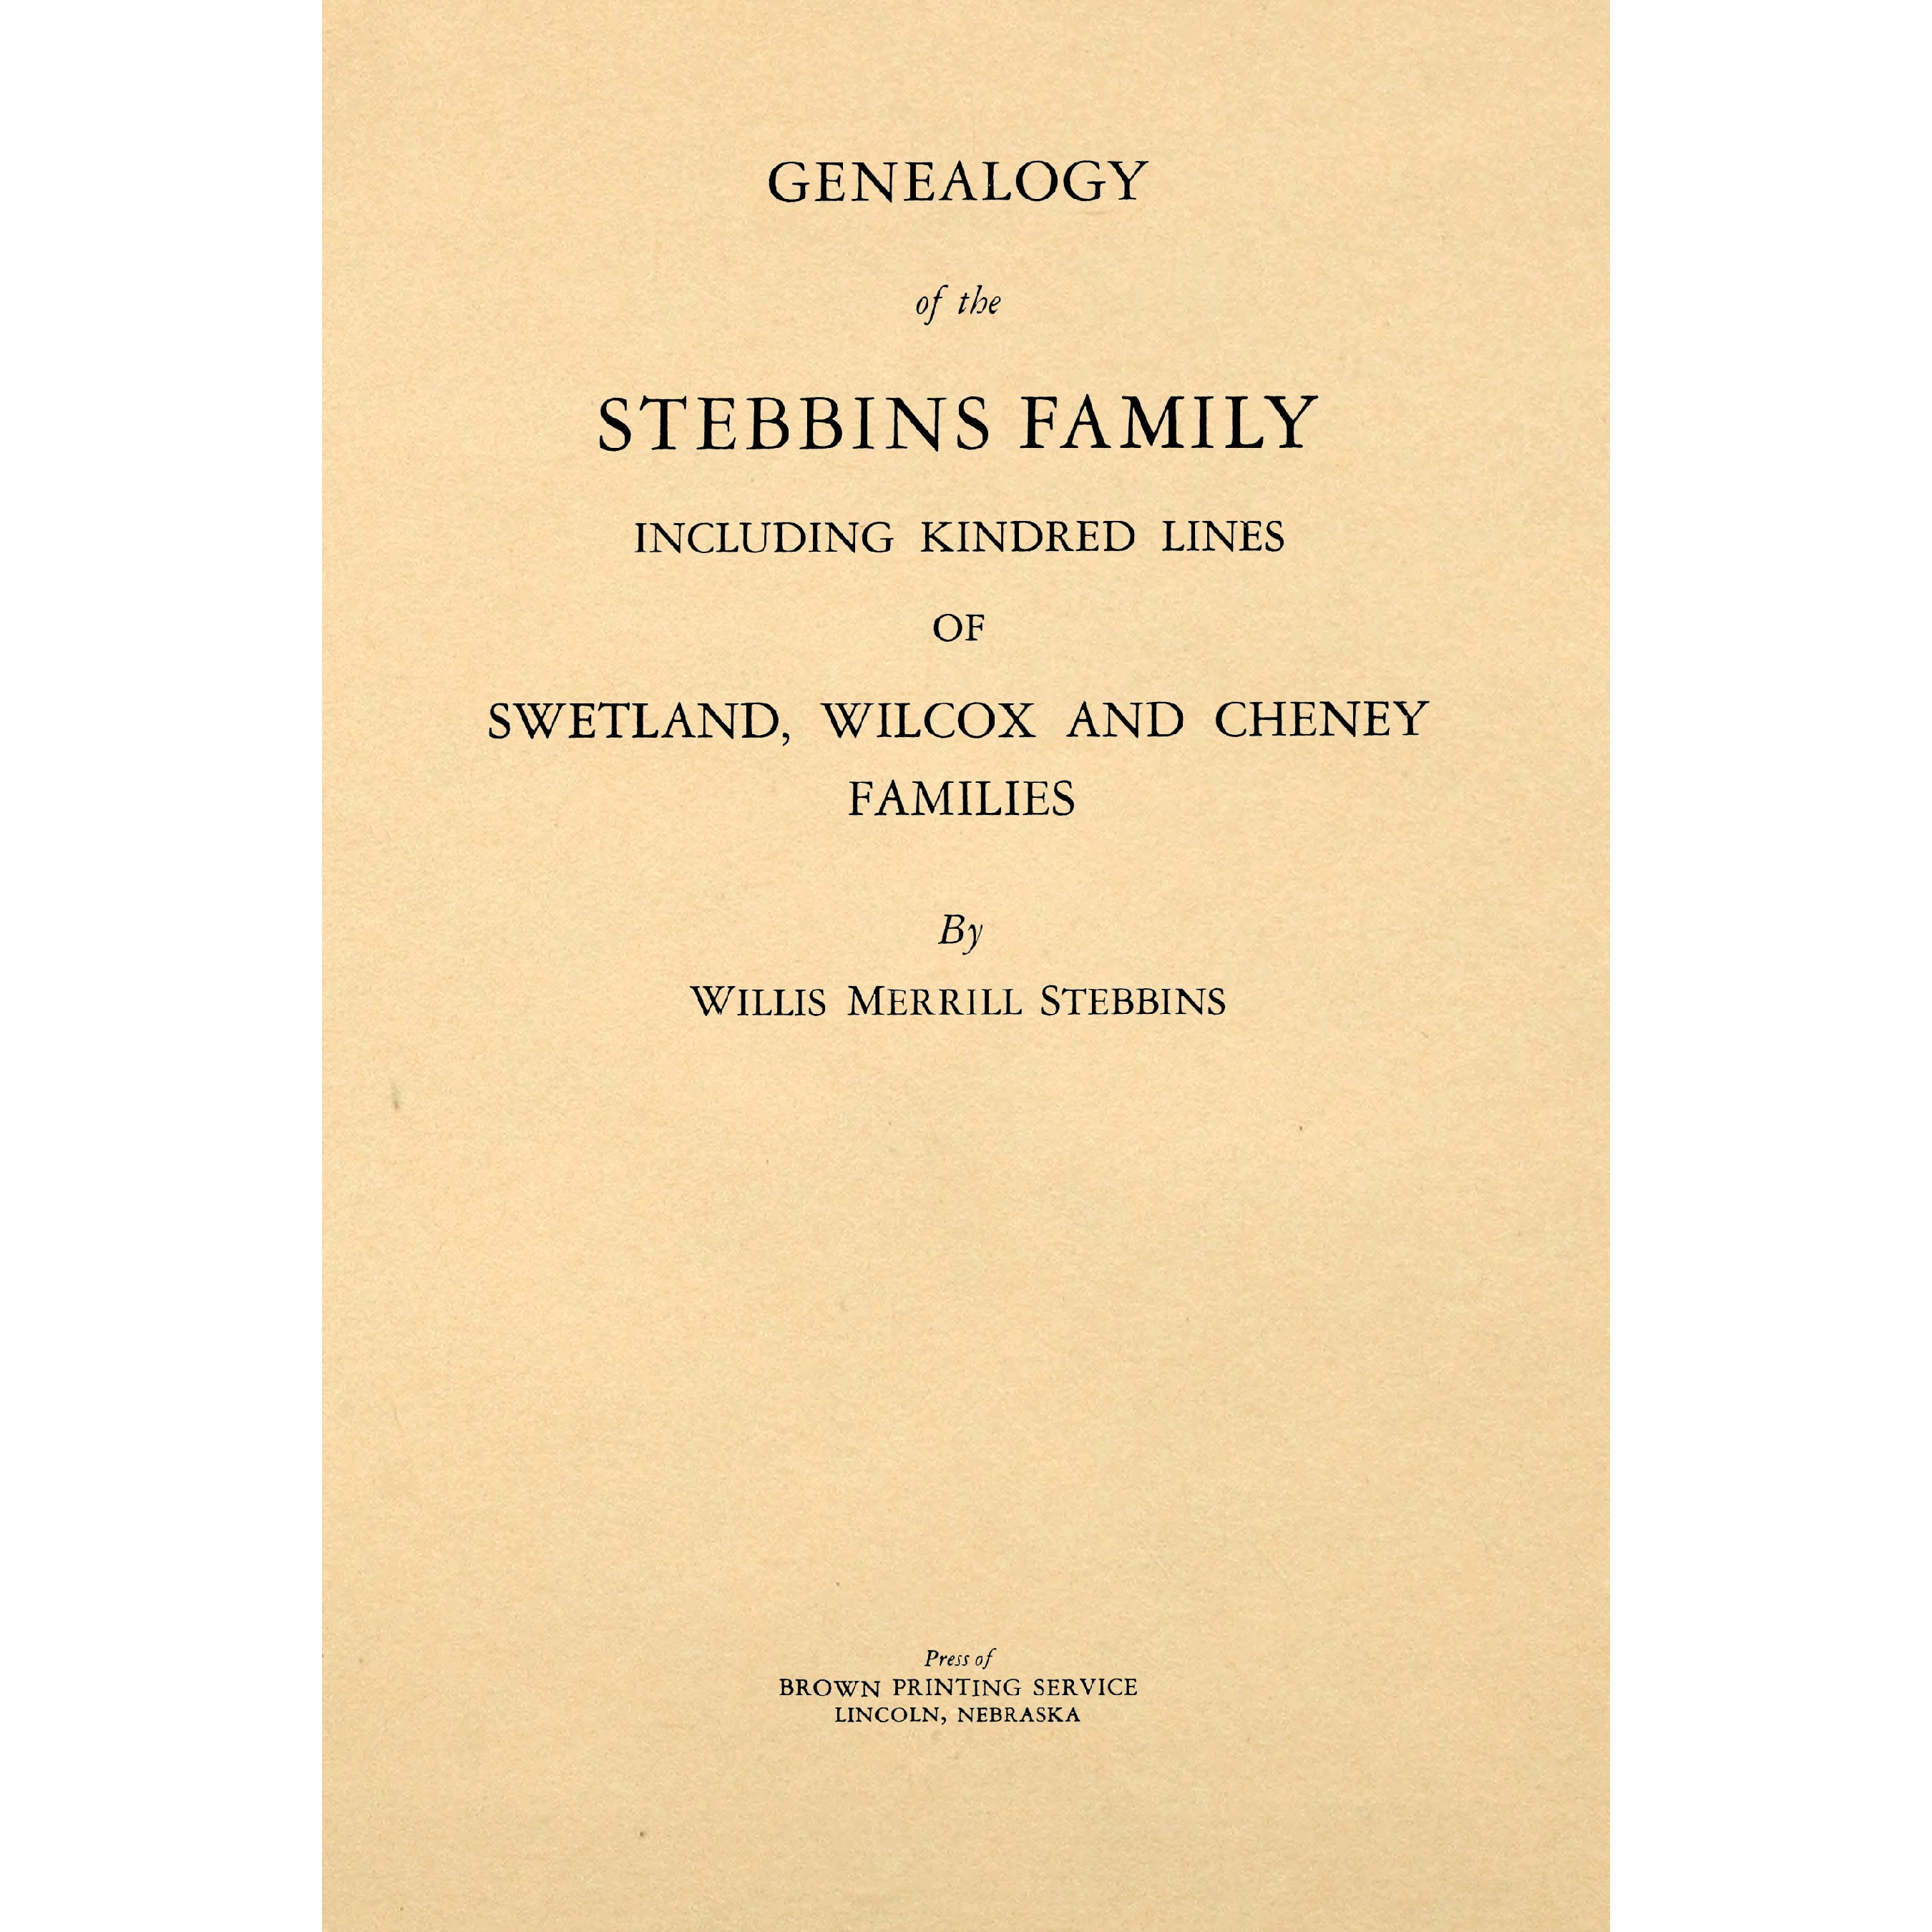 Genealogy of the Stebbins Family